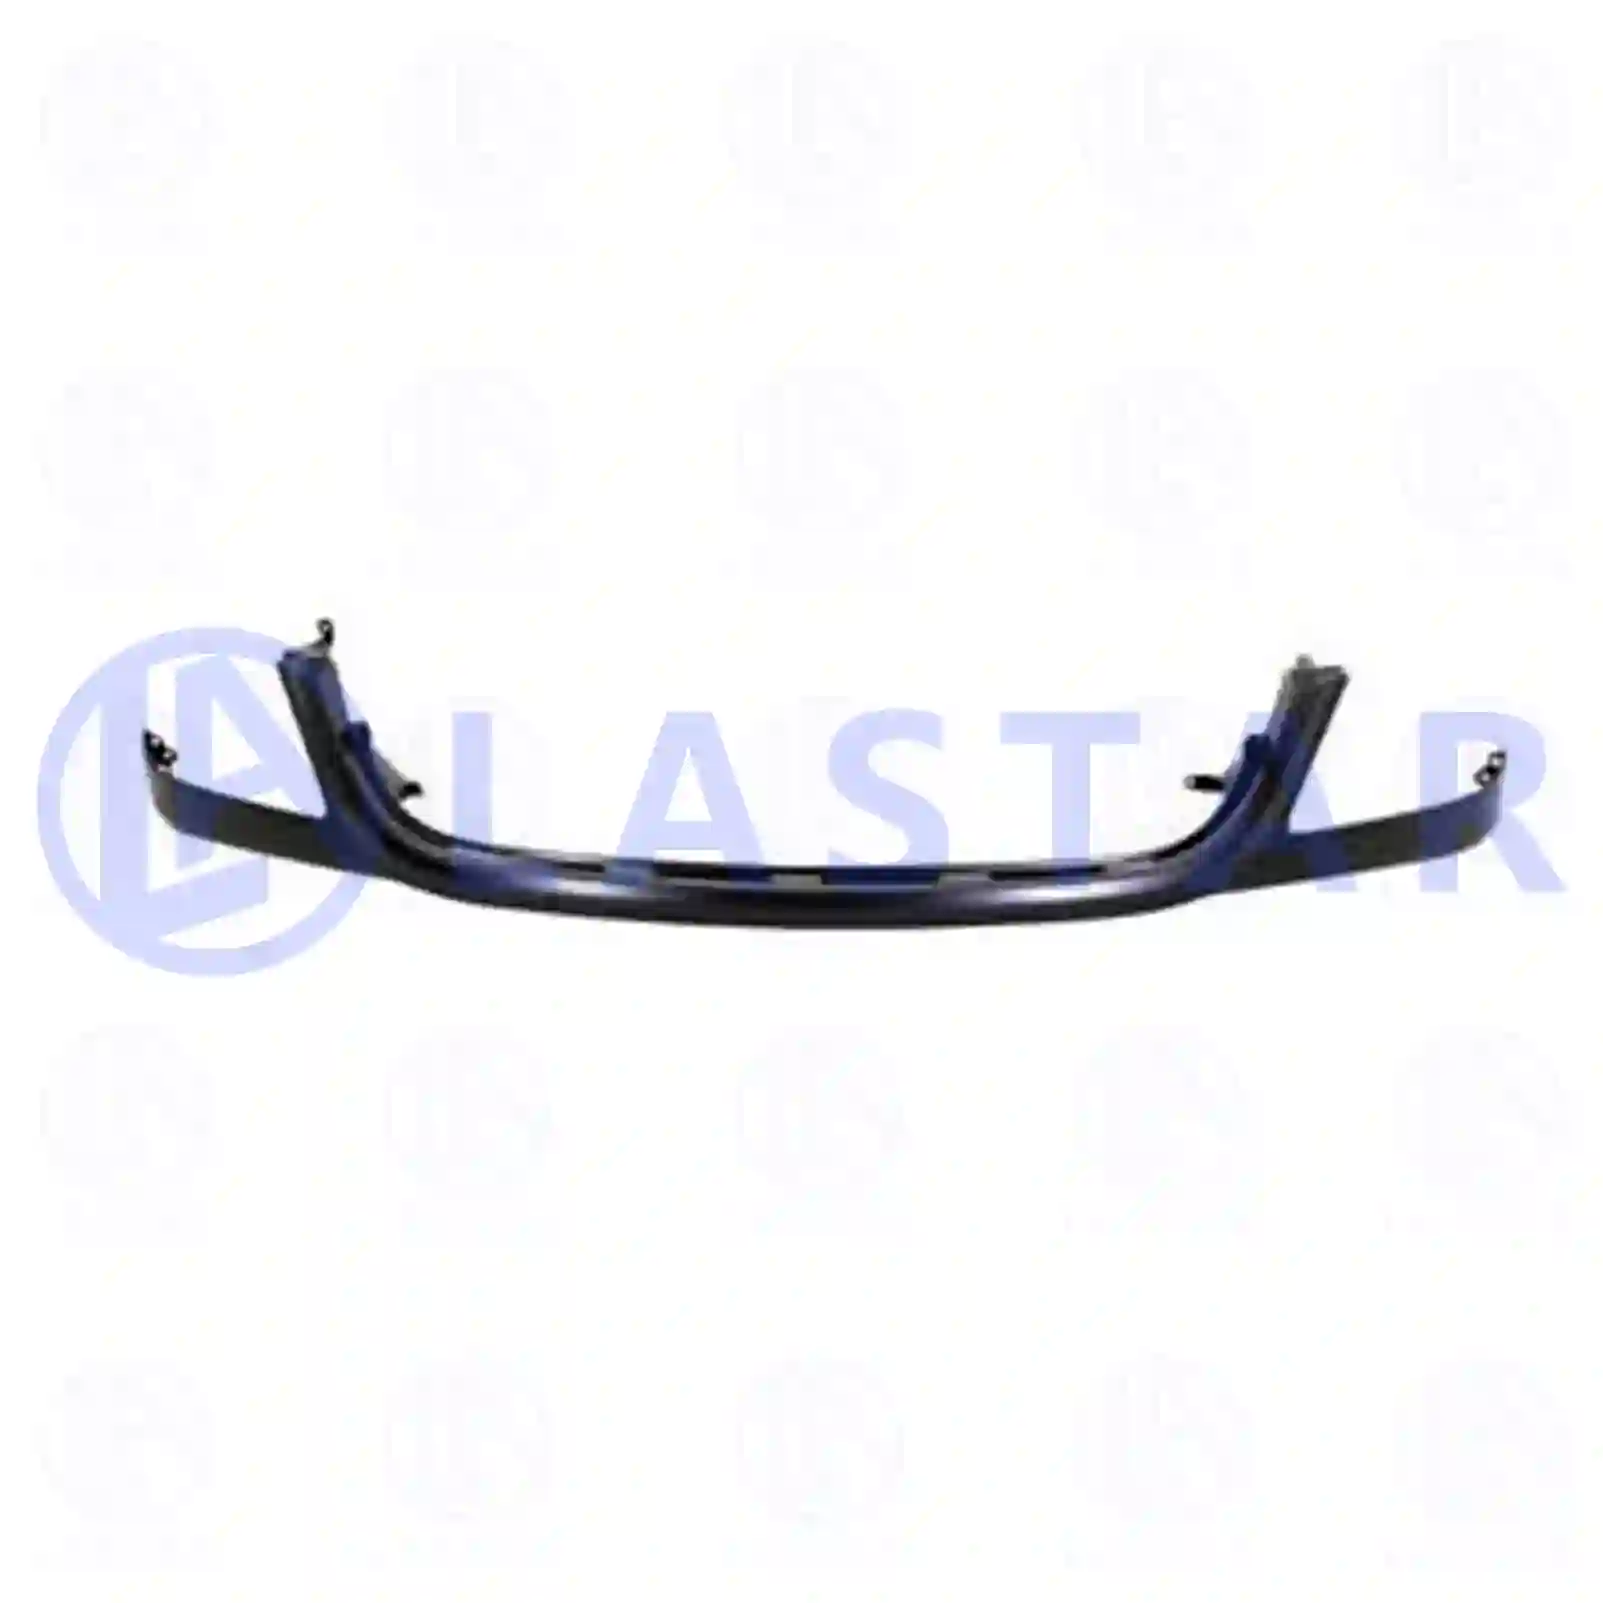 Cover, front grill, 77719222, 9066200024 ||  77719222 Lastar Spare Part | Truck Spare Parts, Auotomotive Spare Parts Cover, front grill, 77719222, 9066200024 ||  77719222 Lastar Spare Part | Truck Spare Parts, Auotomotive Spare Parts